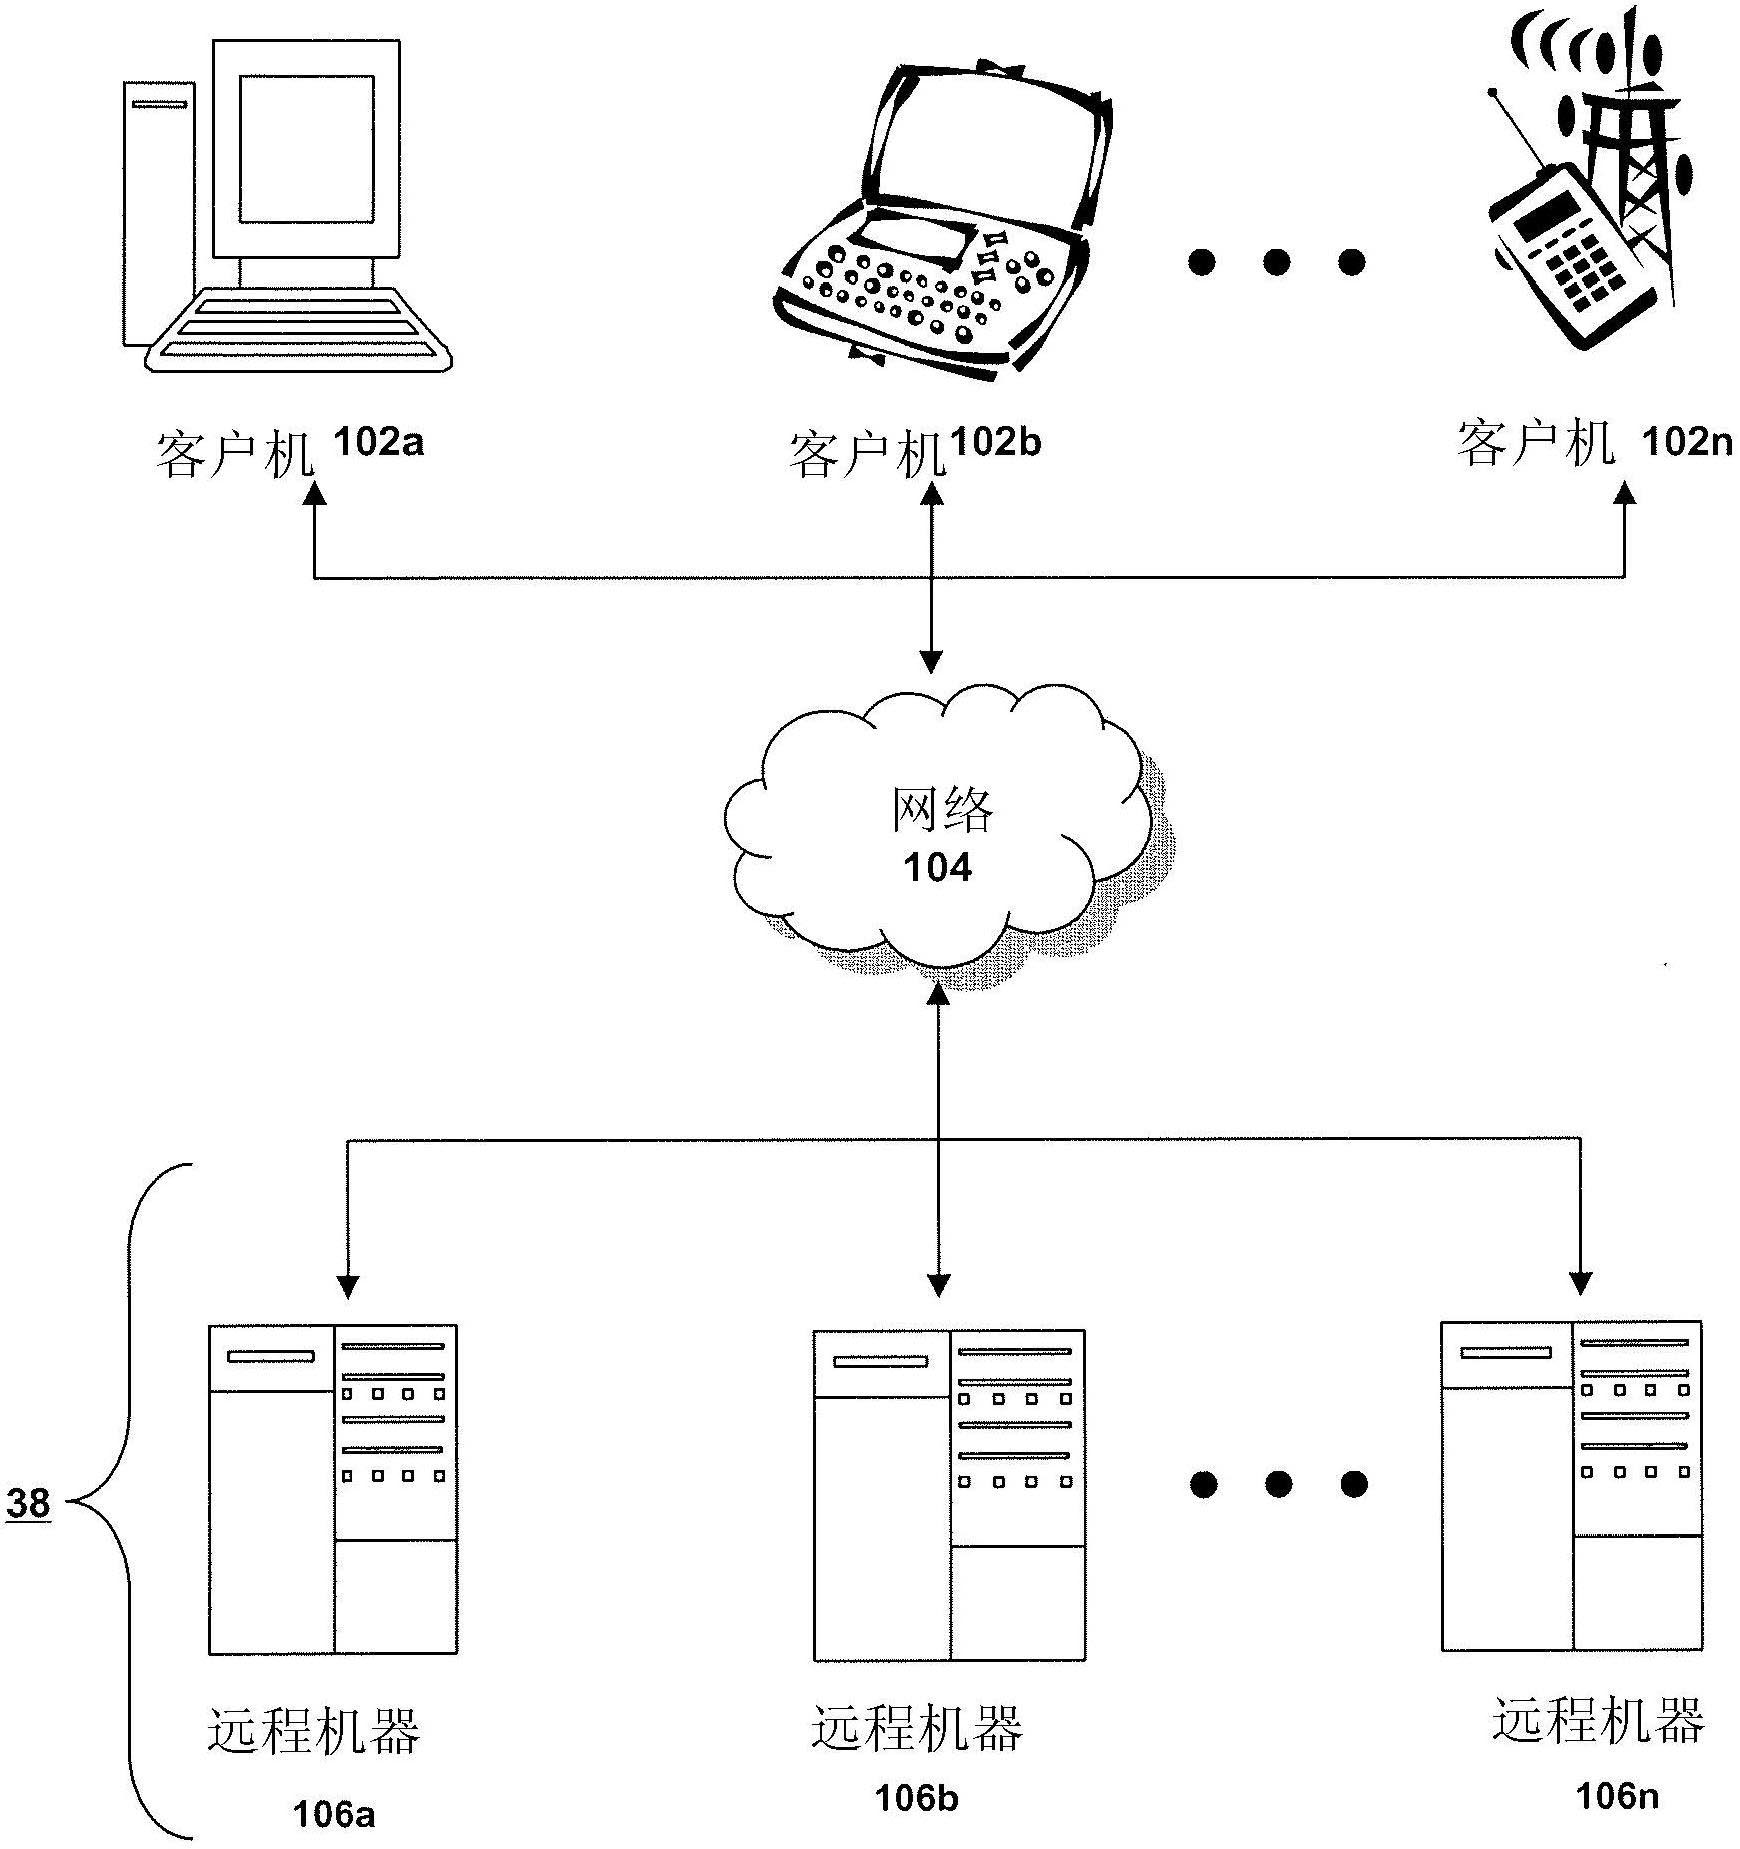 Methods and systems for displaying, on a first machine, data associated with a drive of a second machine, without mapping the drive